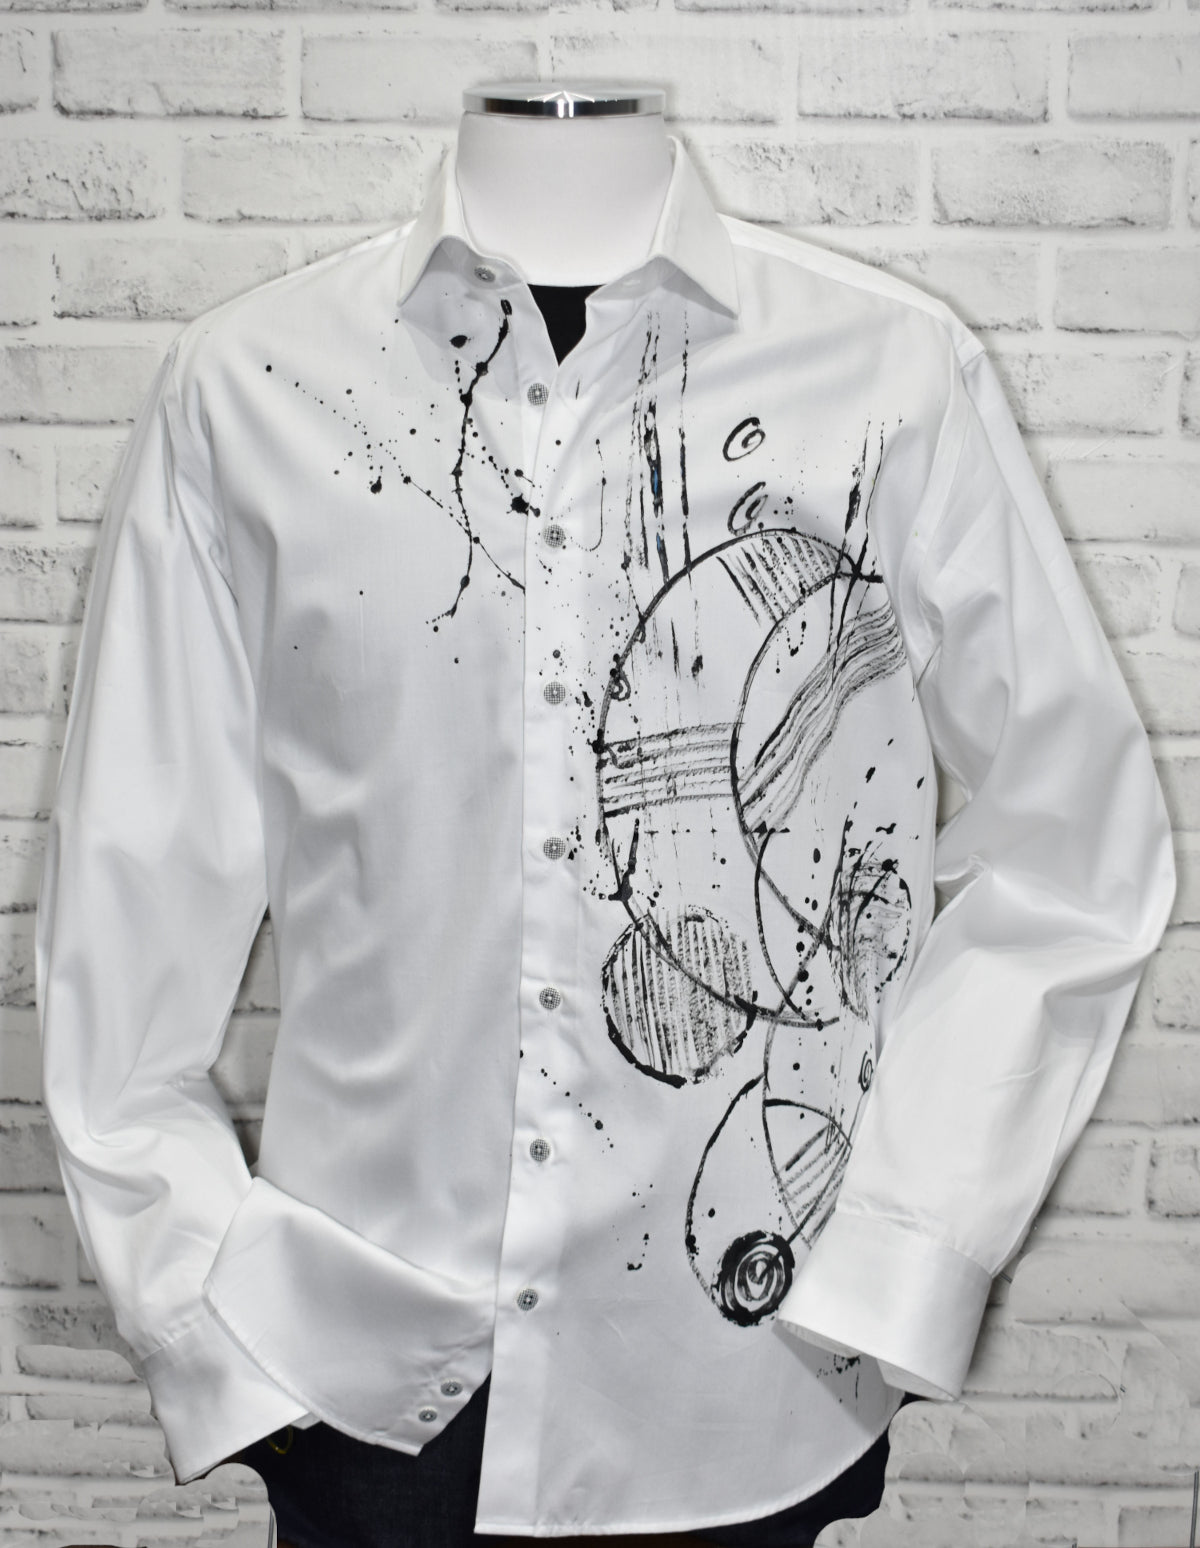 Experience luxe style with the Shades of Black Hand Painted shirt! Crafted with rich white cotton sateen fabric and featuring a custom hand painted abstract geometric pattern, this shirt stands out from the rest. With a classic shaped fit for a timeless look, this unique design is an exclusive to Marcello.